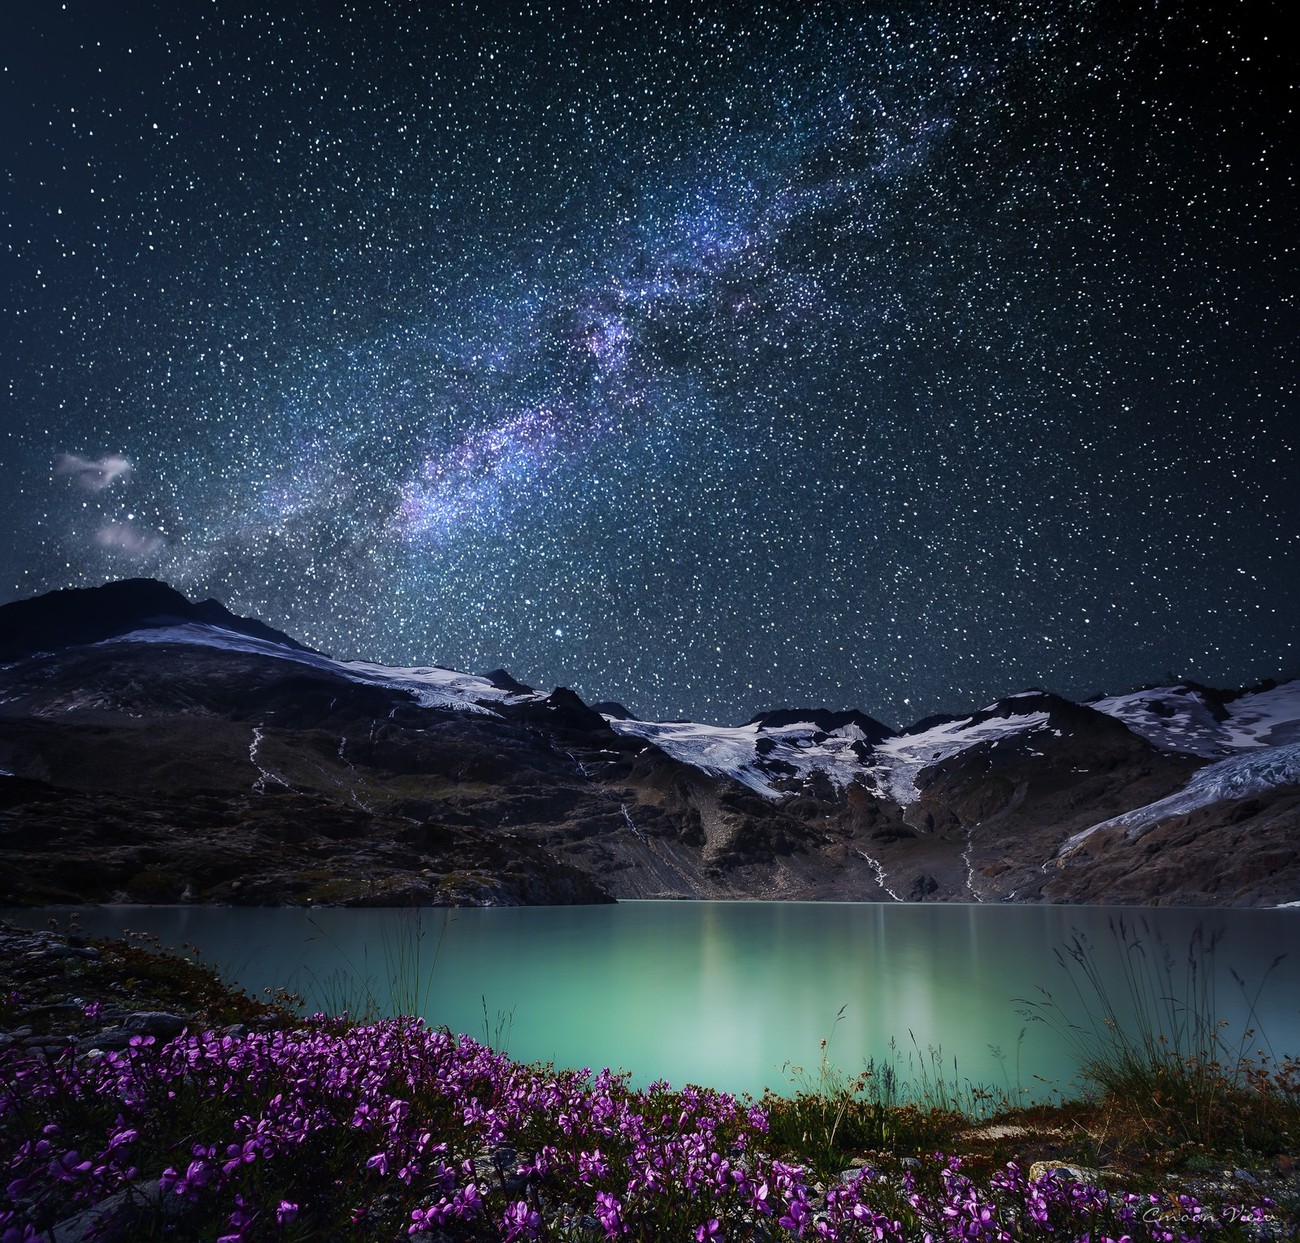 Incredible Shots Of Nature At Night: Photo Contest Winners